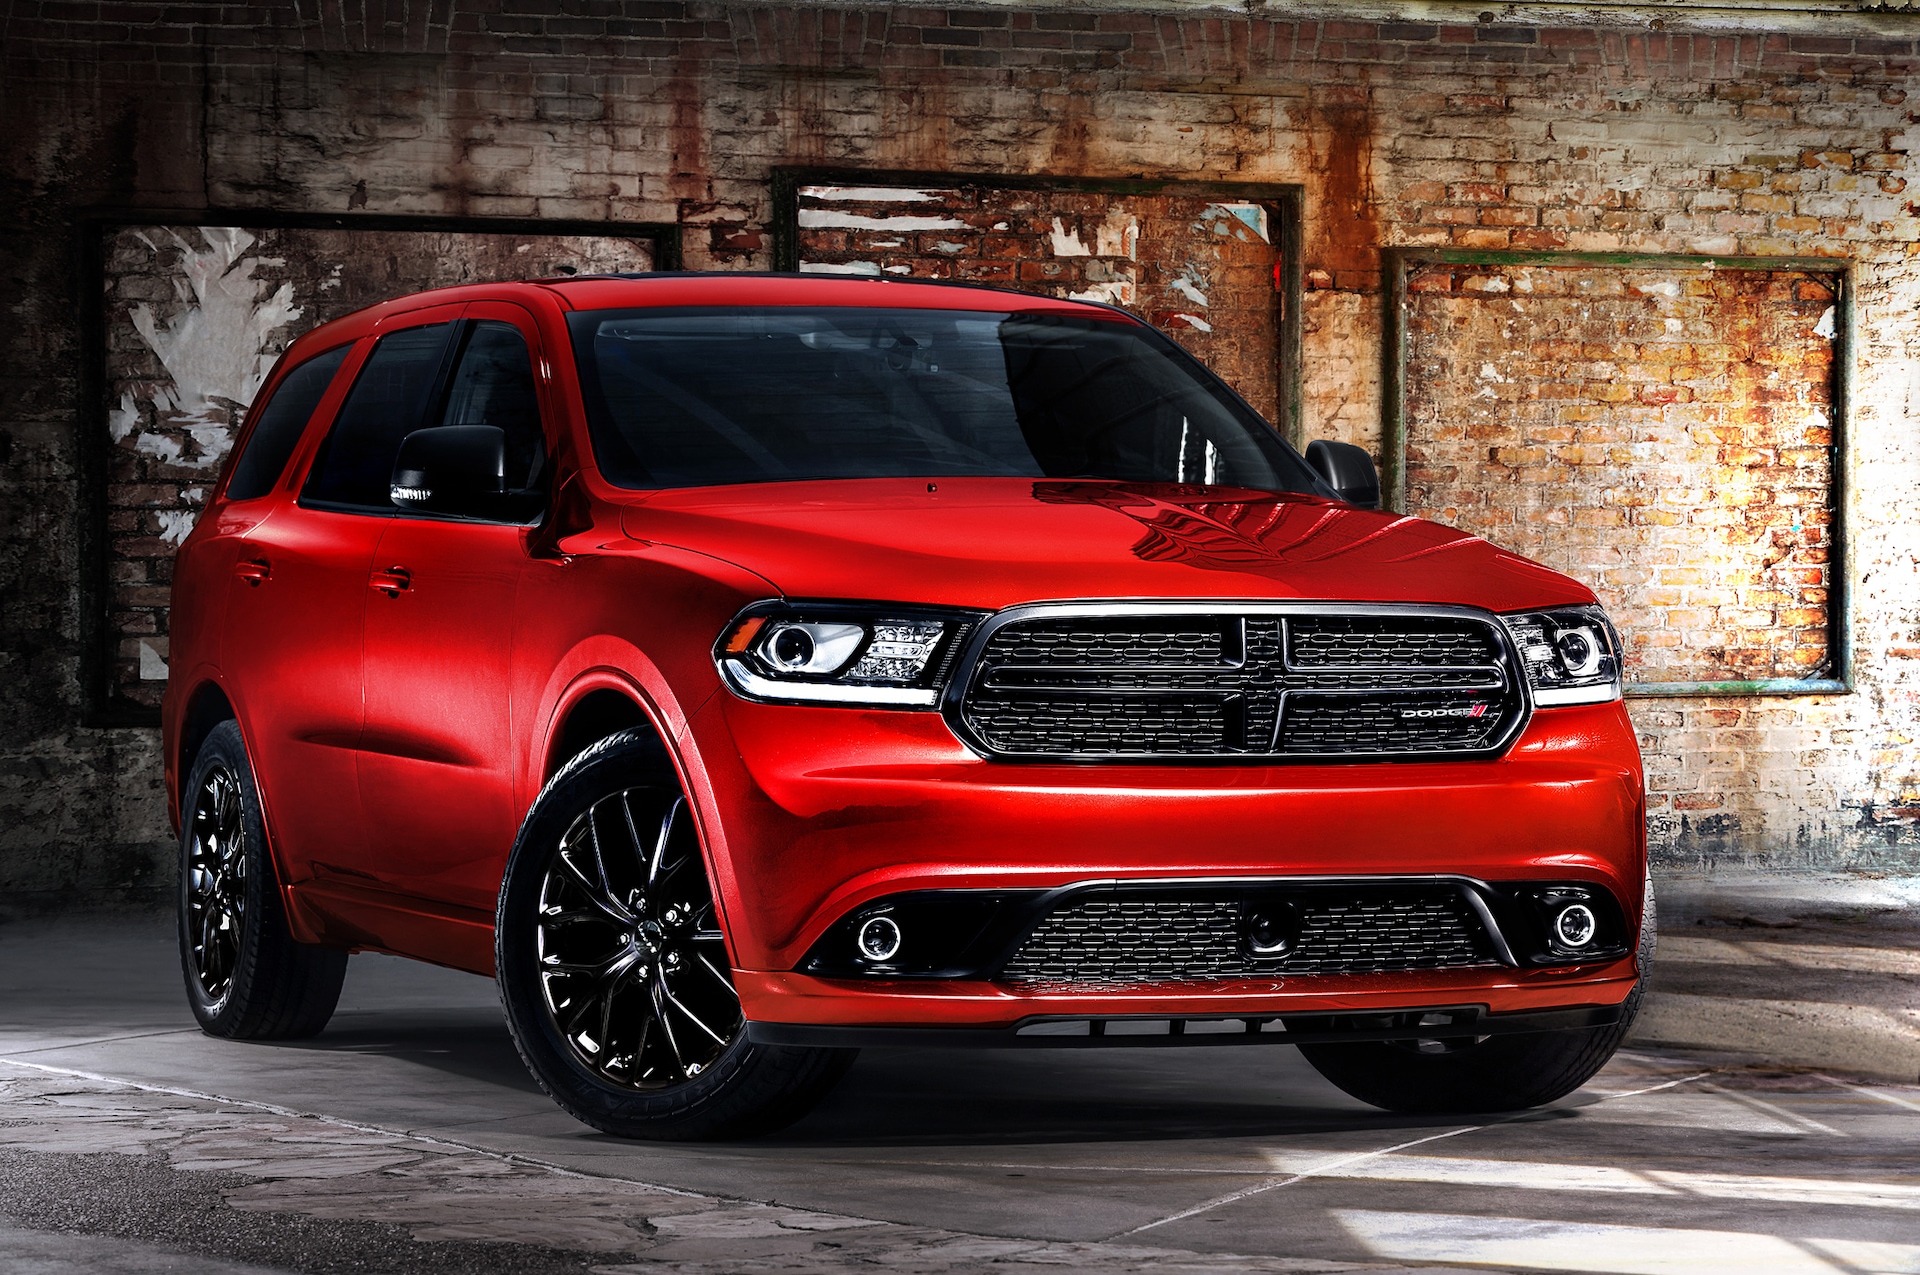 2014 Dodge Durango Turns to the Dark Side With Blacktop Package